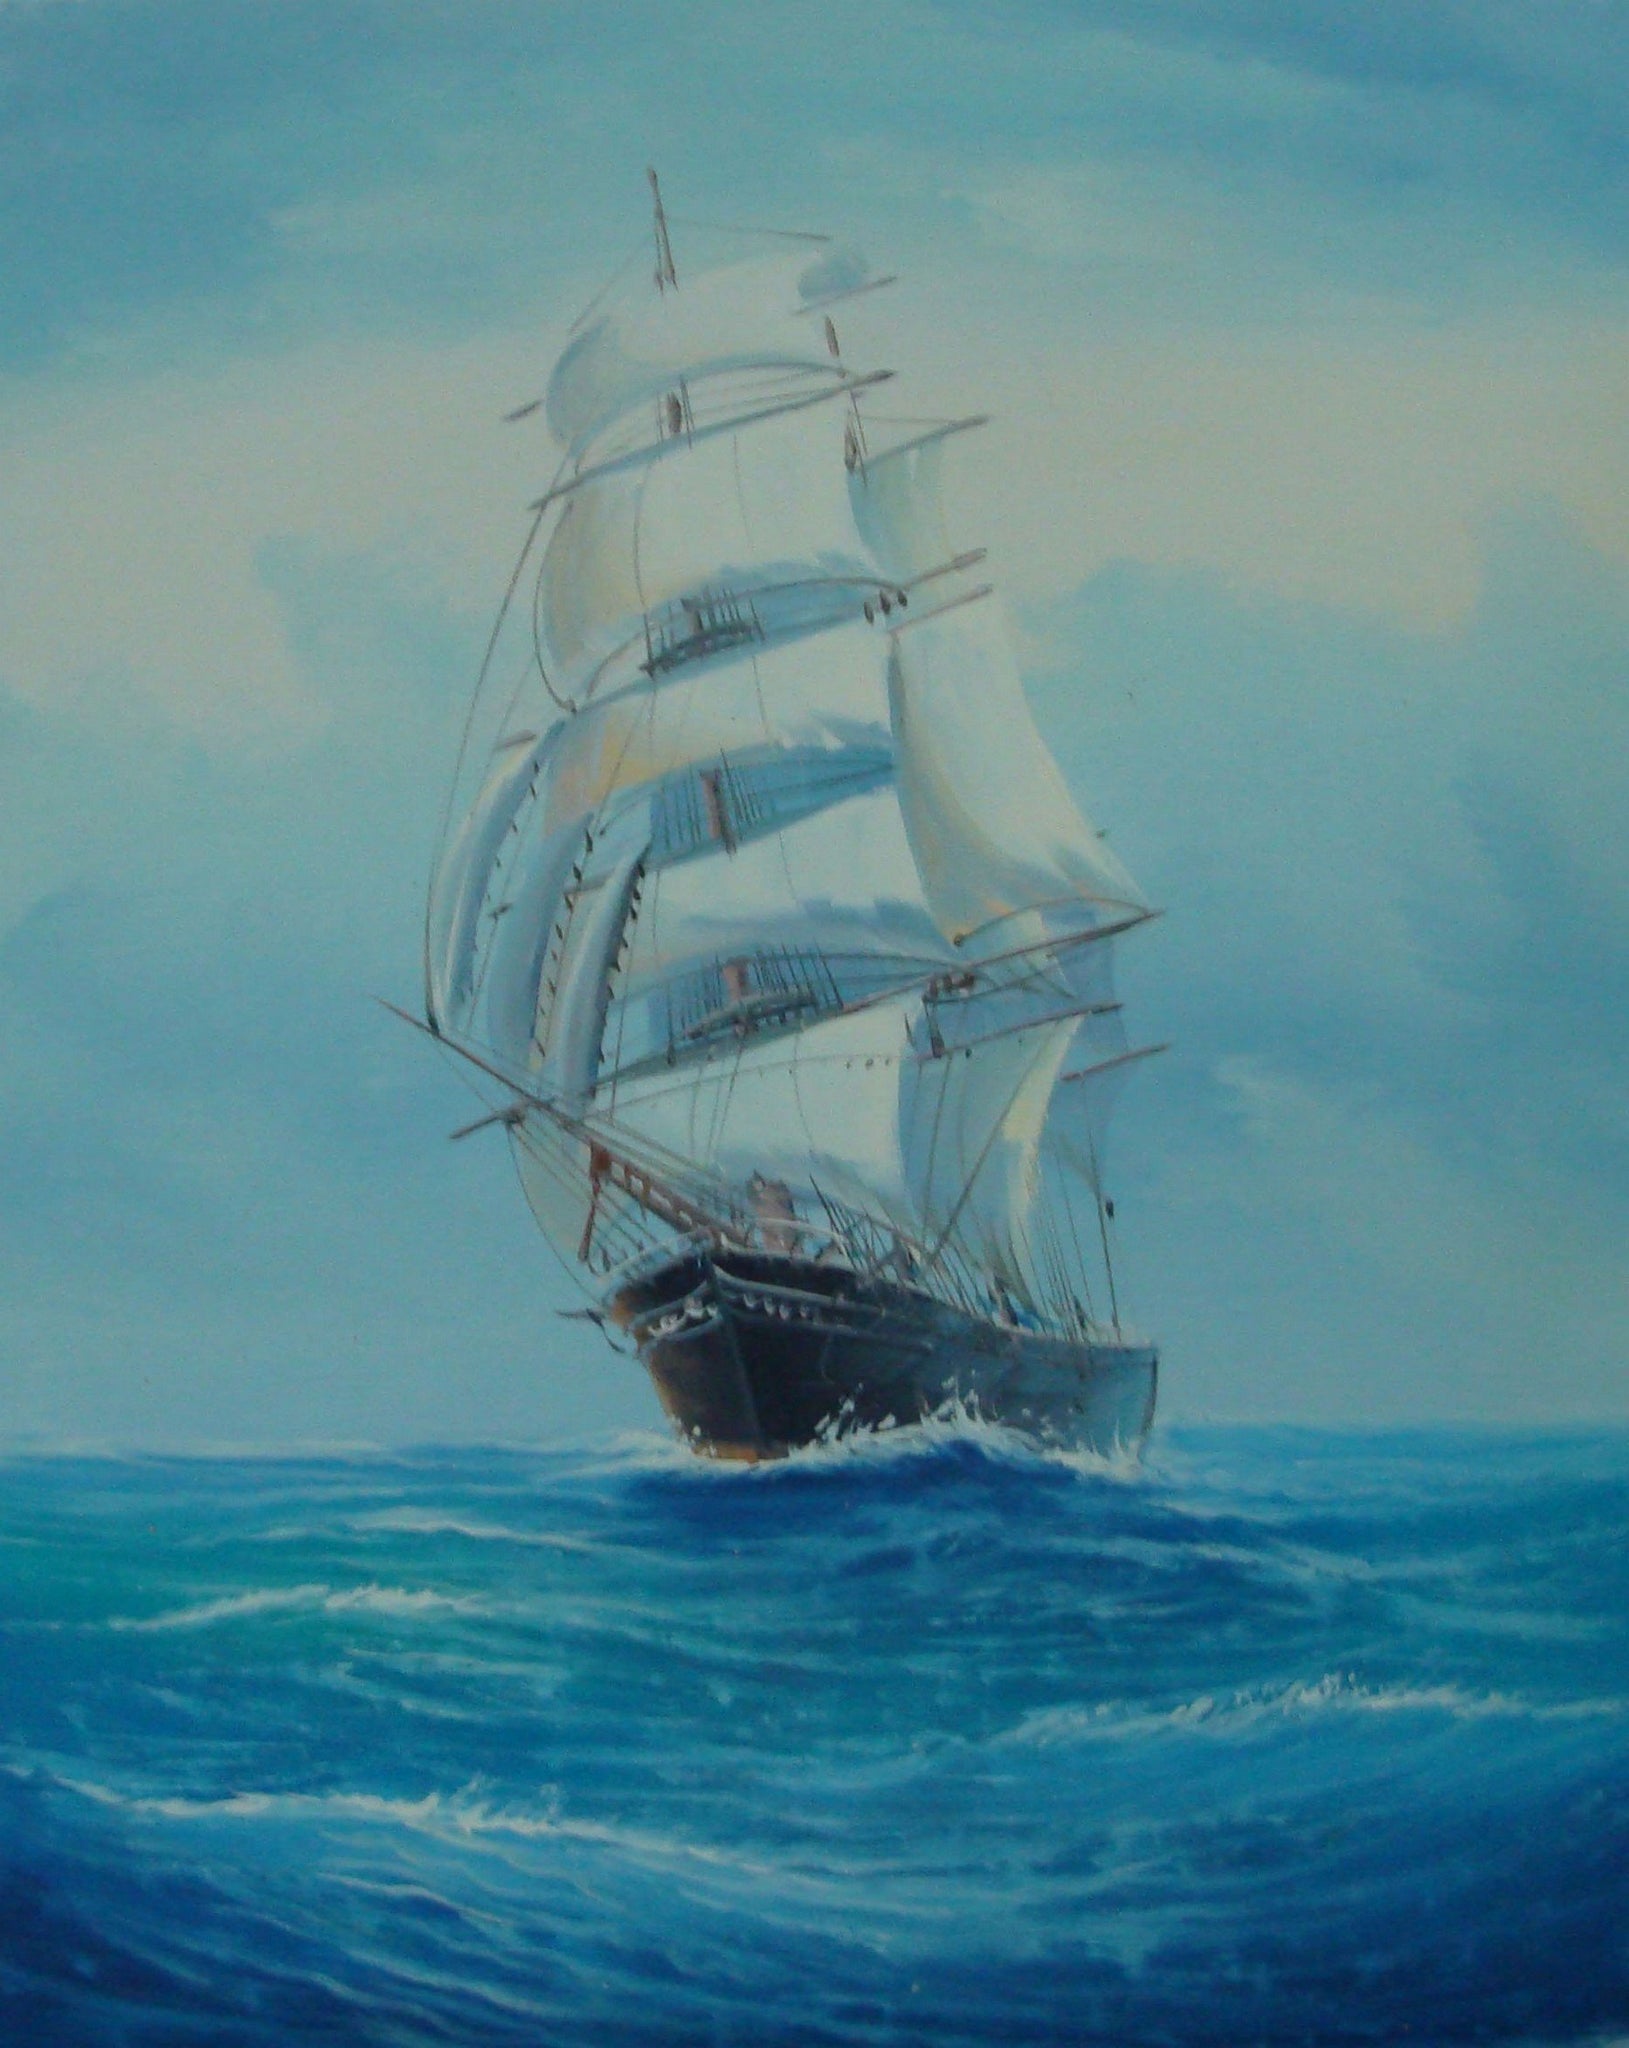 Canvas Art, Canvas Painting, Wall Art, Seascape Painting, Oil Painting, Large Painting, Dining Room Wall Art, Canvas Oil Painting, Canvas Wall Art, Sailing Boat at Sea-Grace Painting Crafts